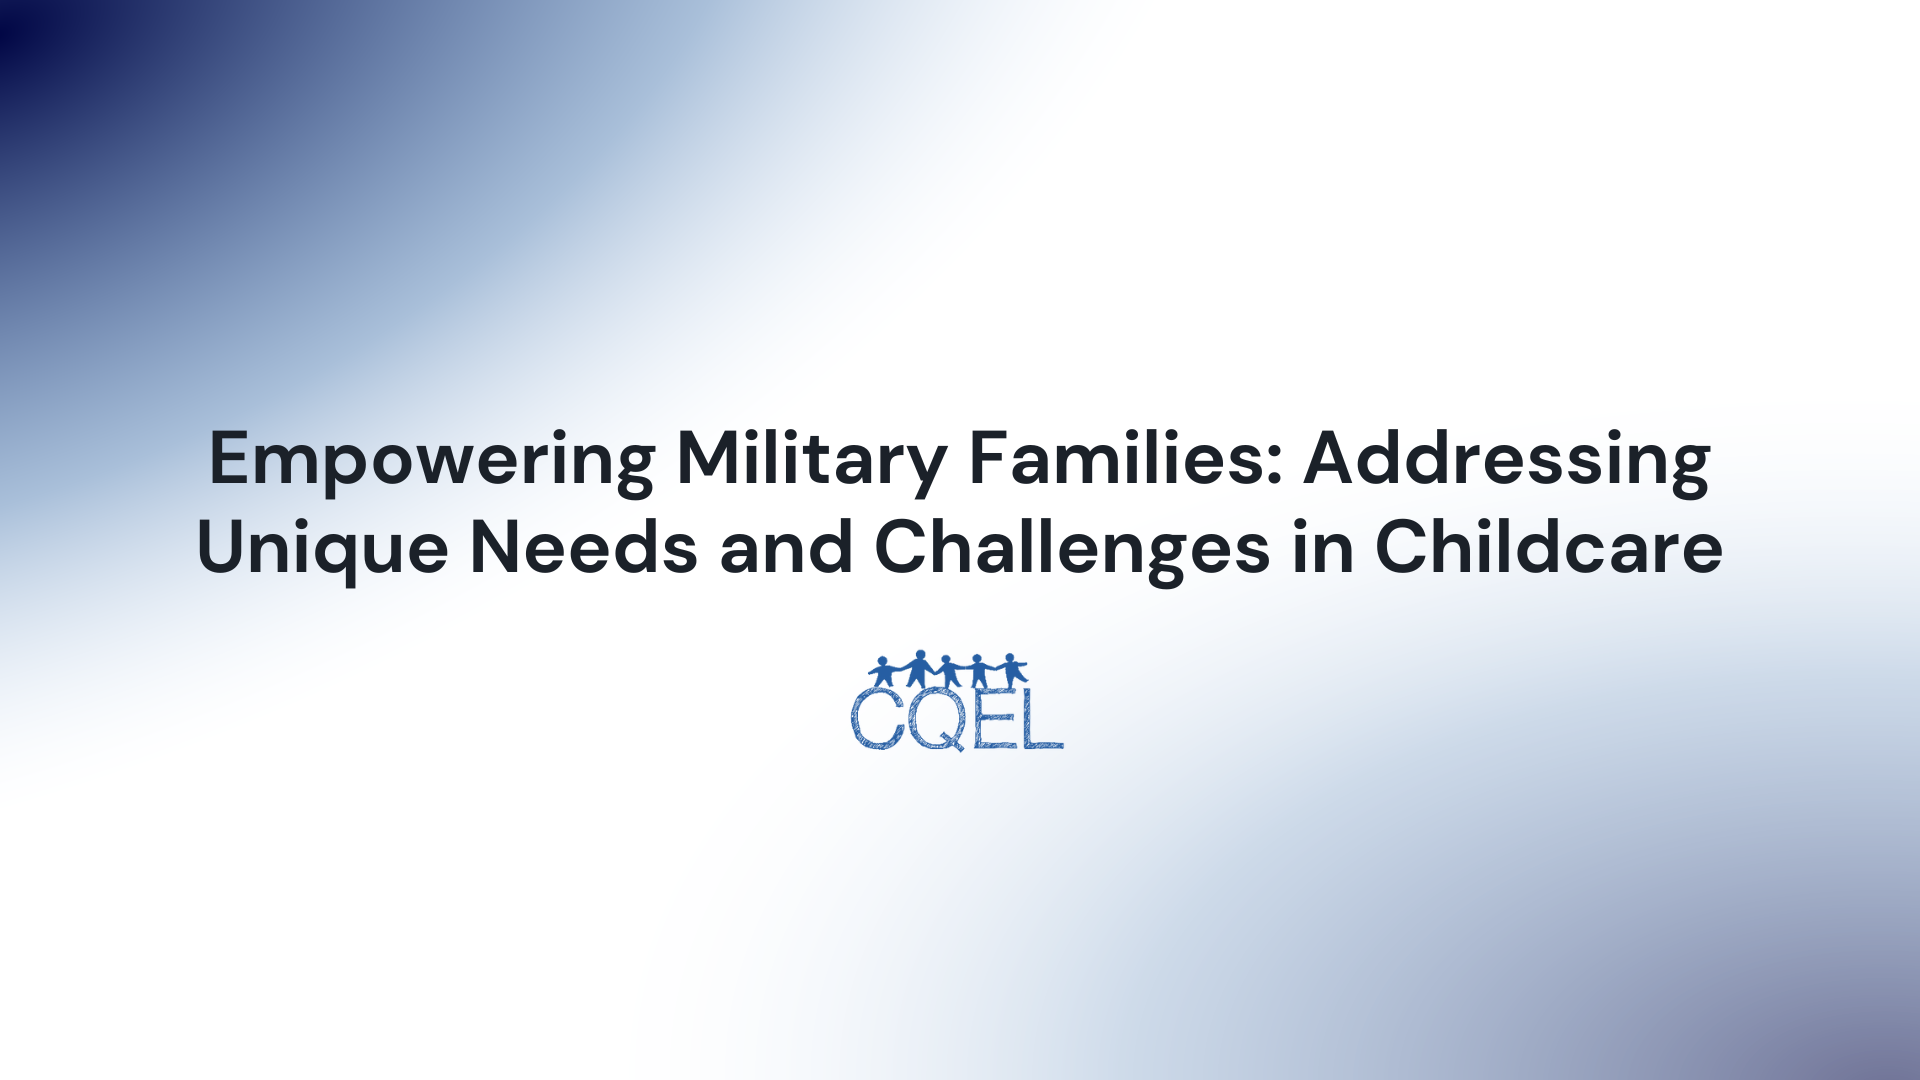 Empowering Military Families: Addressing Unique Needs and Challenges in Childcare